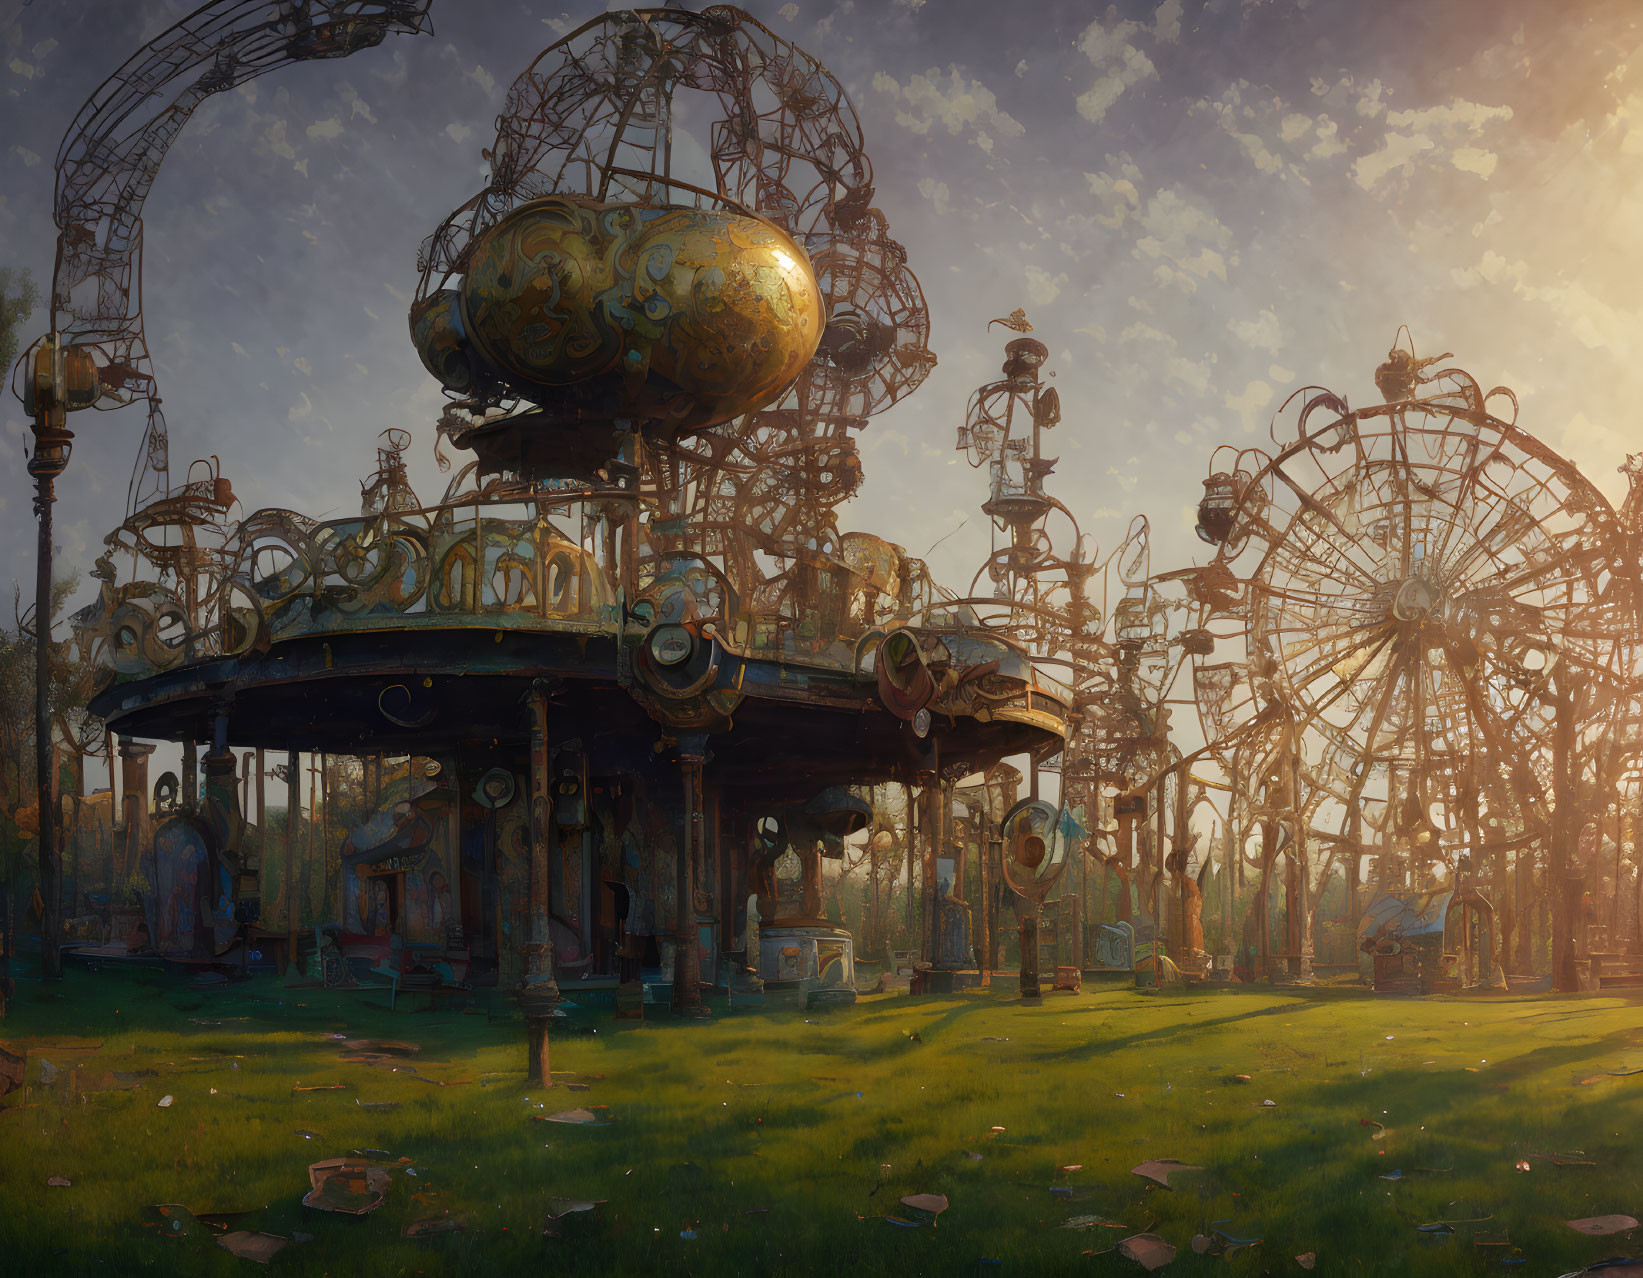 Abandoned amusement park with rusting carousel and Ferris wheels in serene forest setting